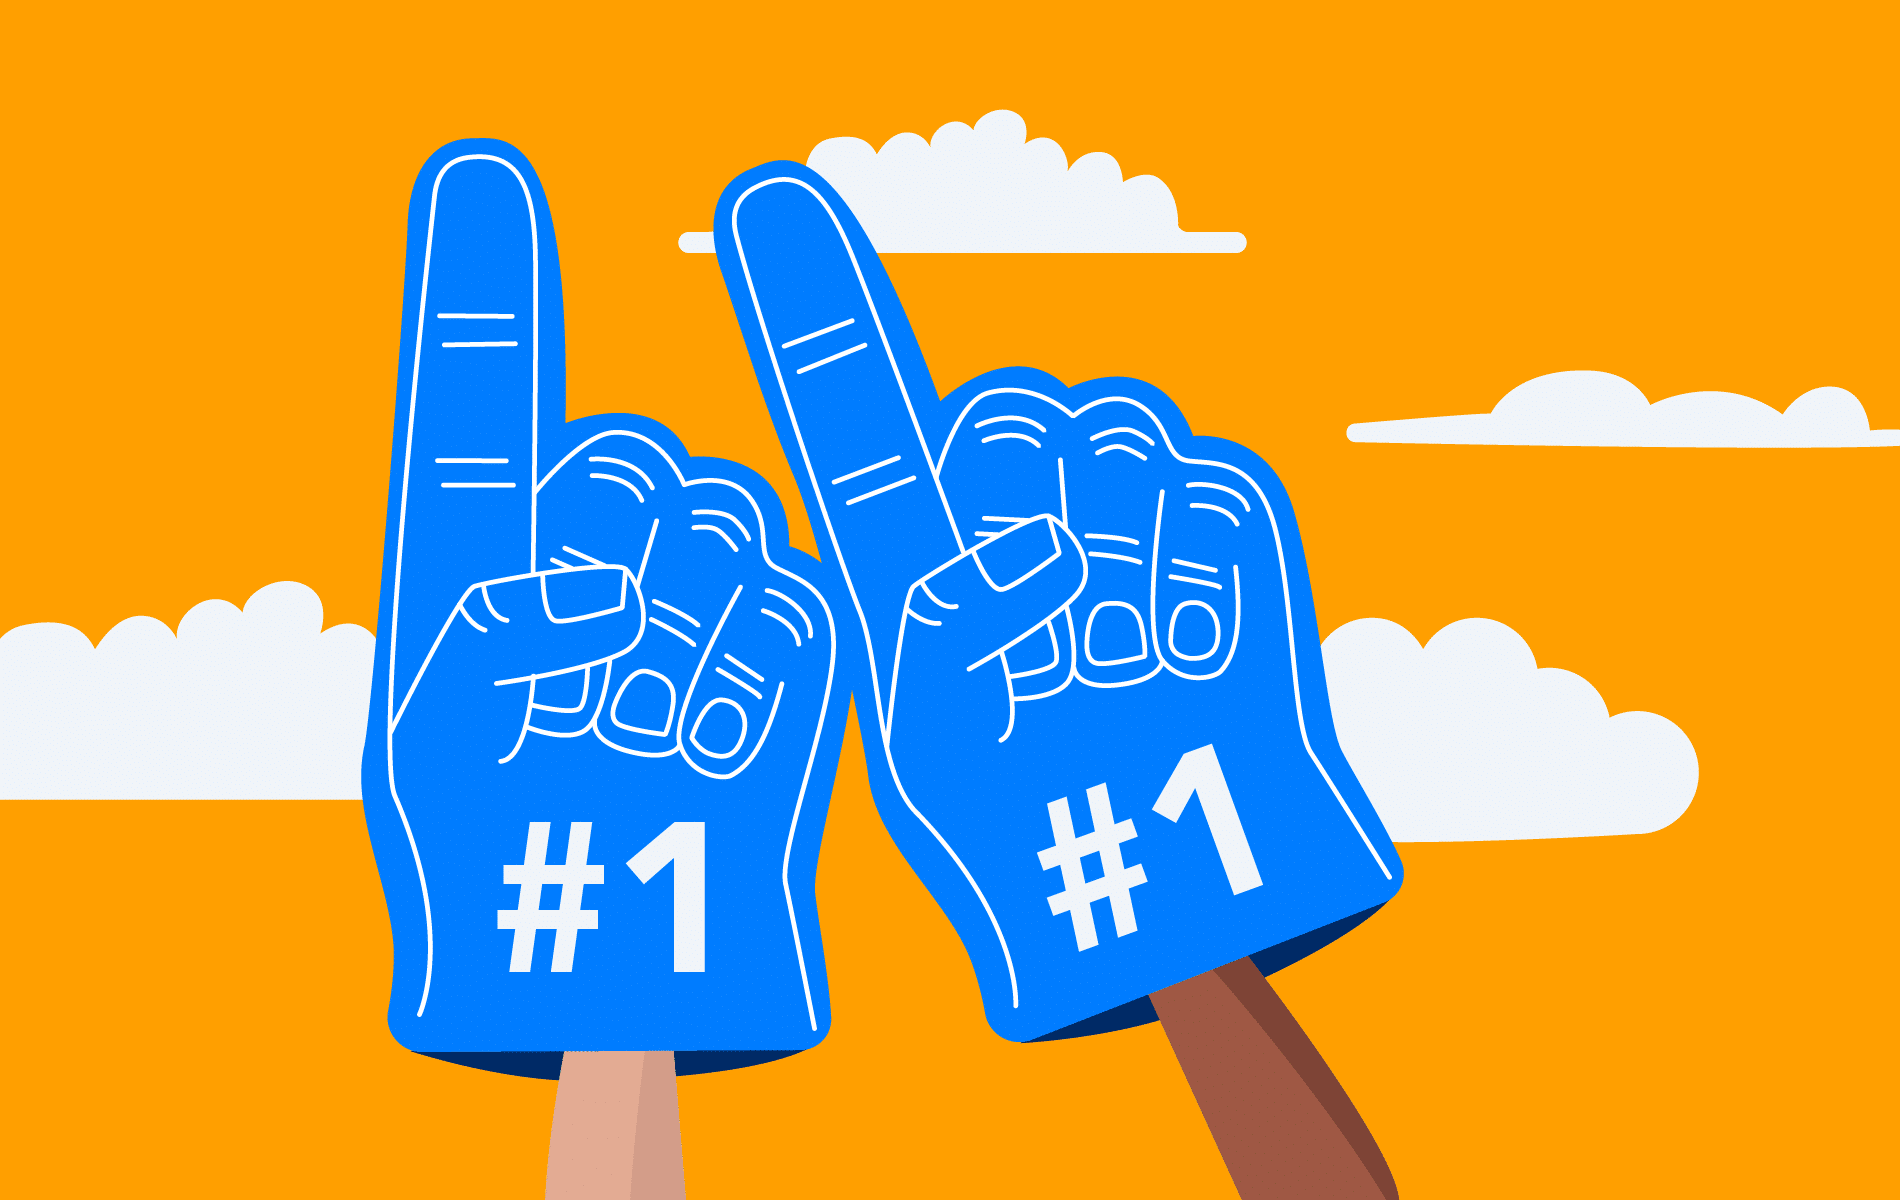 an illustration of two #1 foam fingers in the air to cheer on servant leadership.